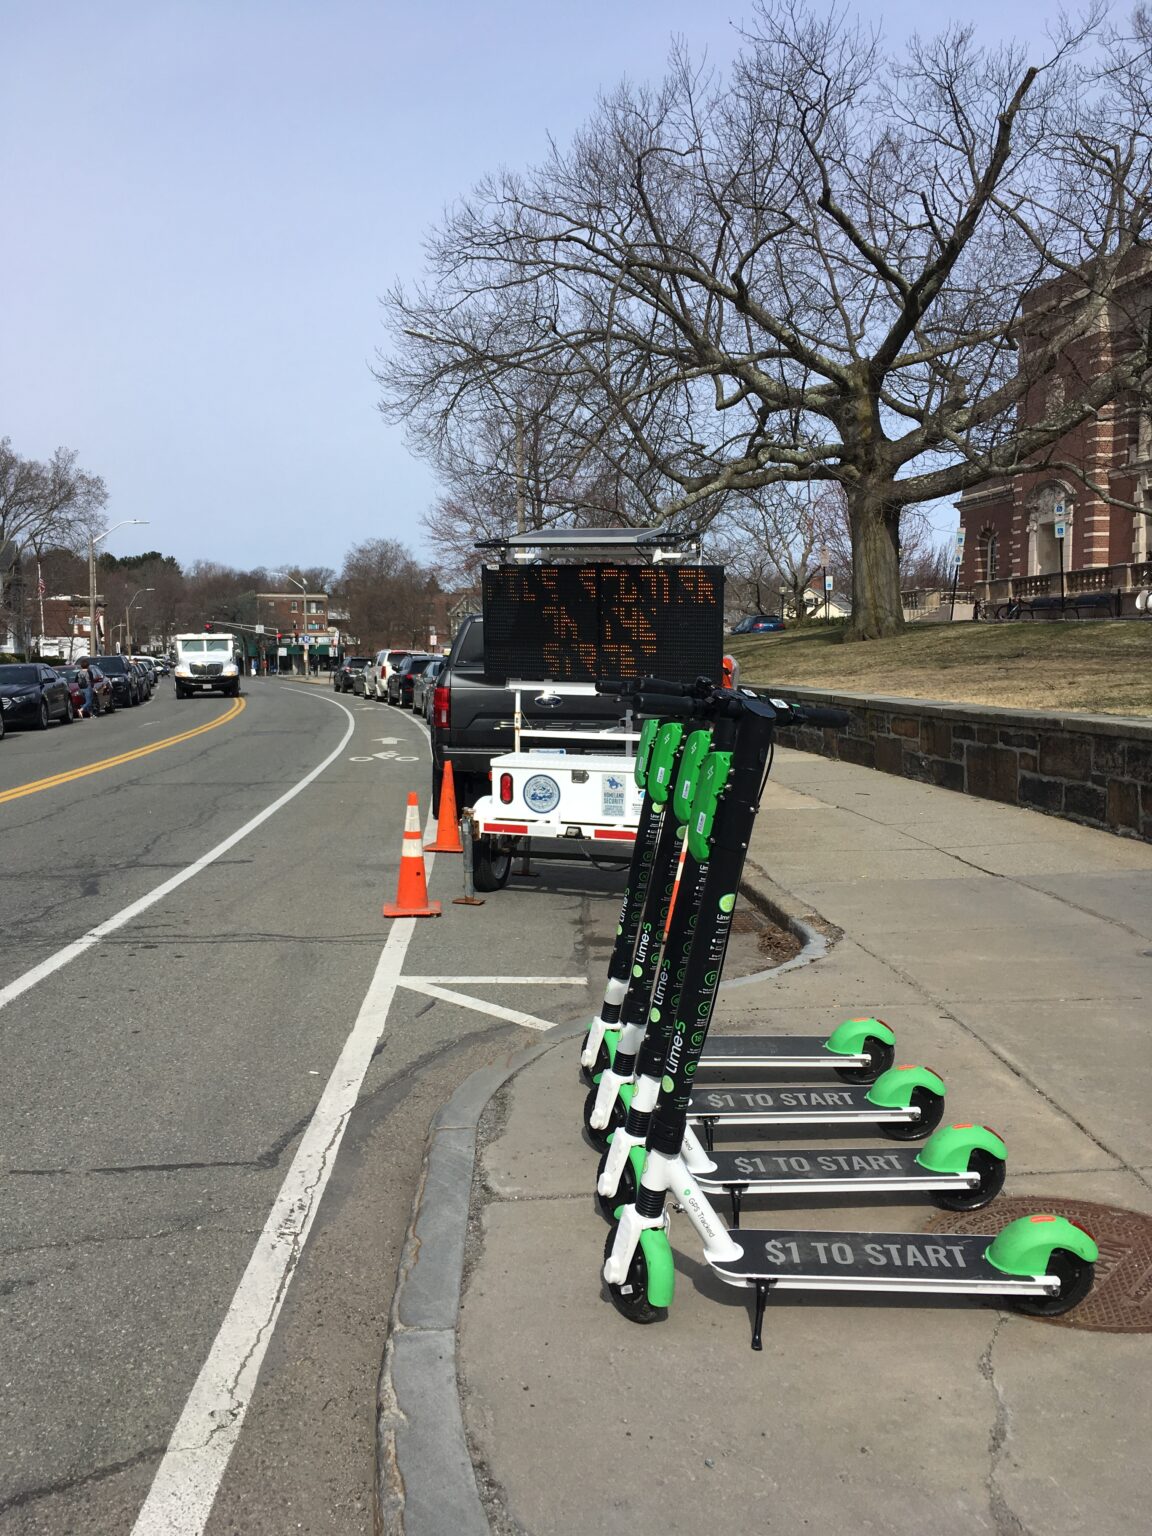 Scooters lined up on the street.